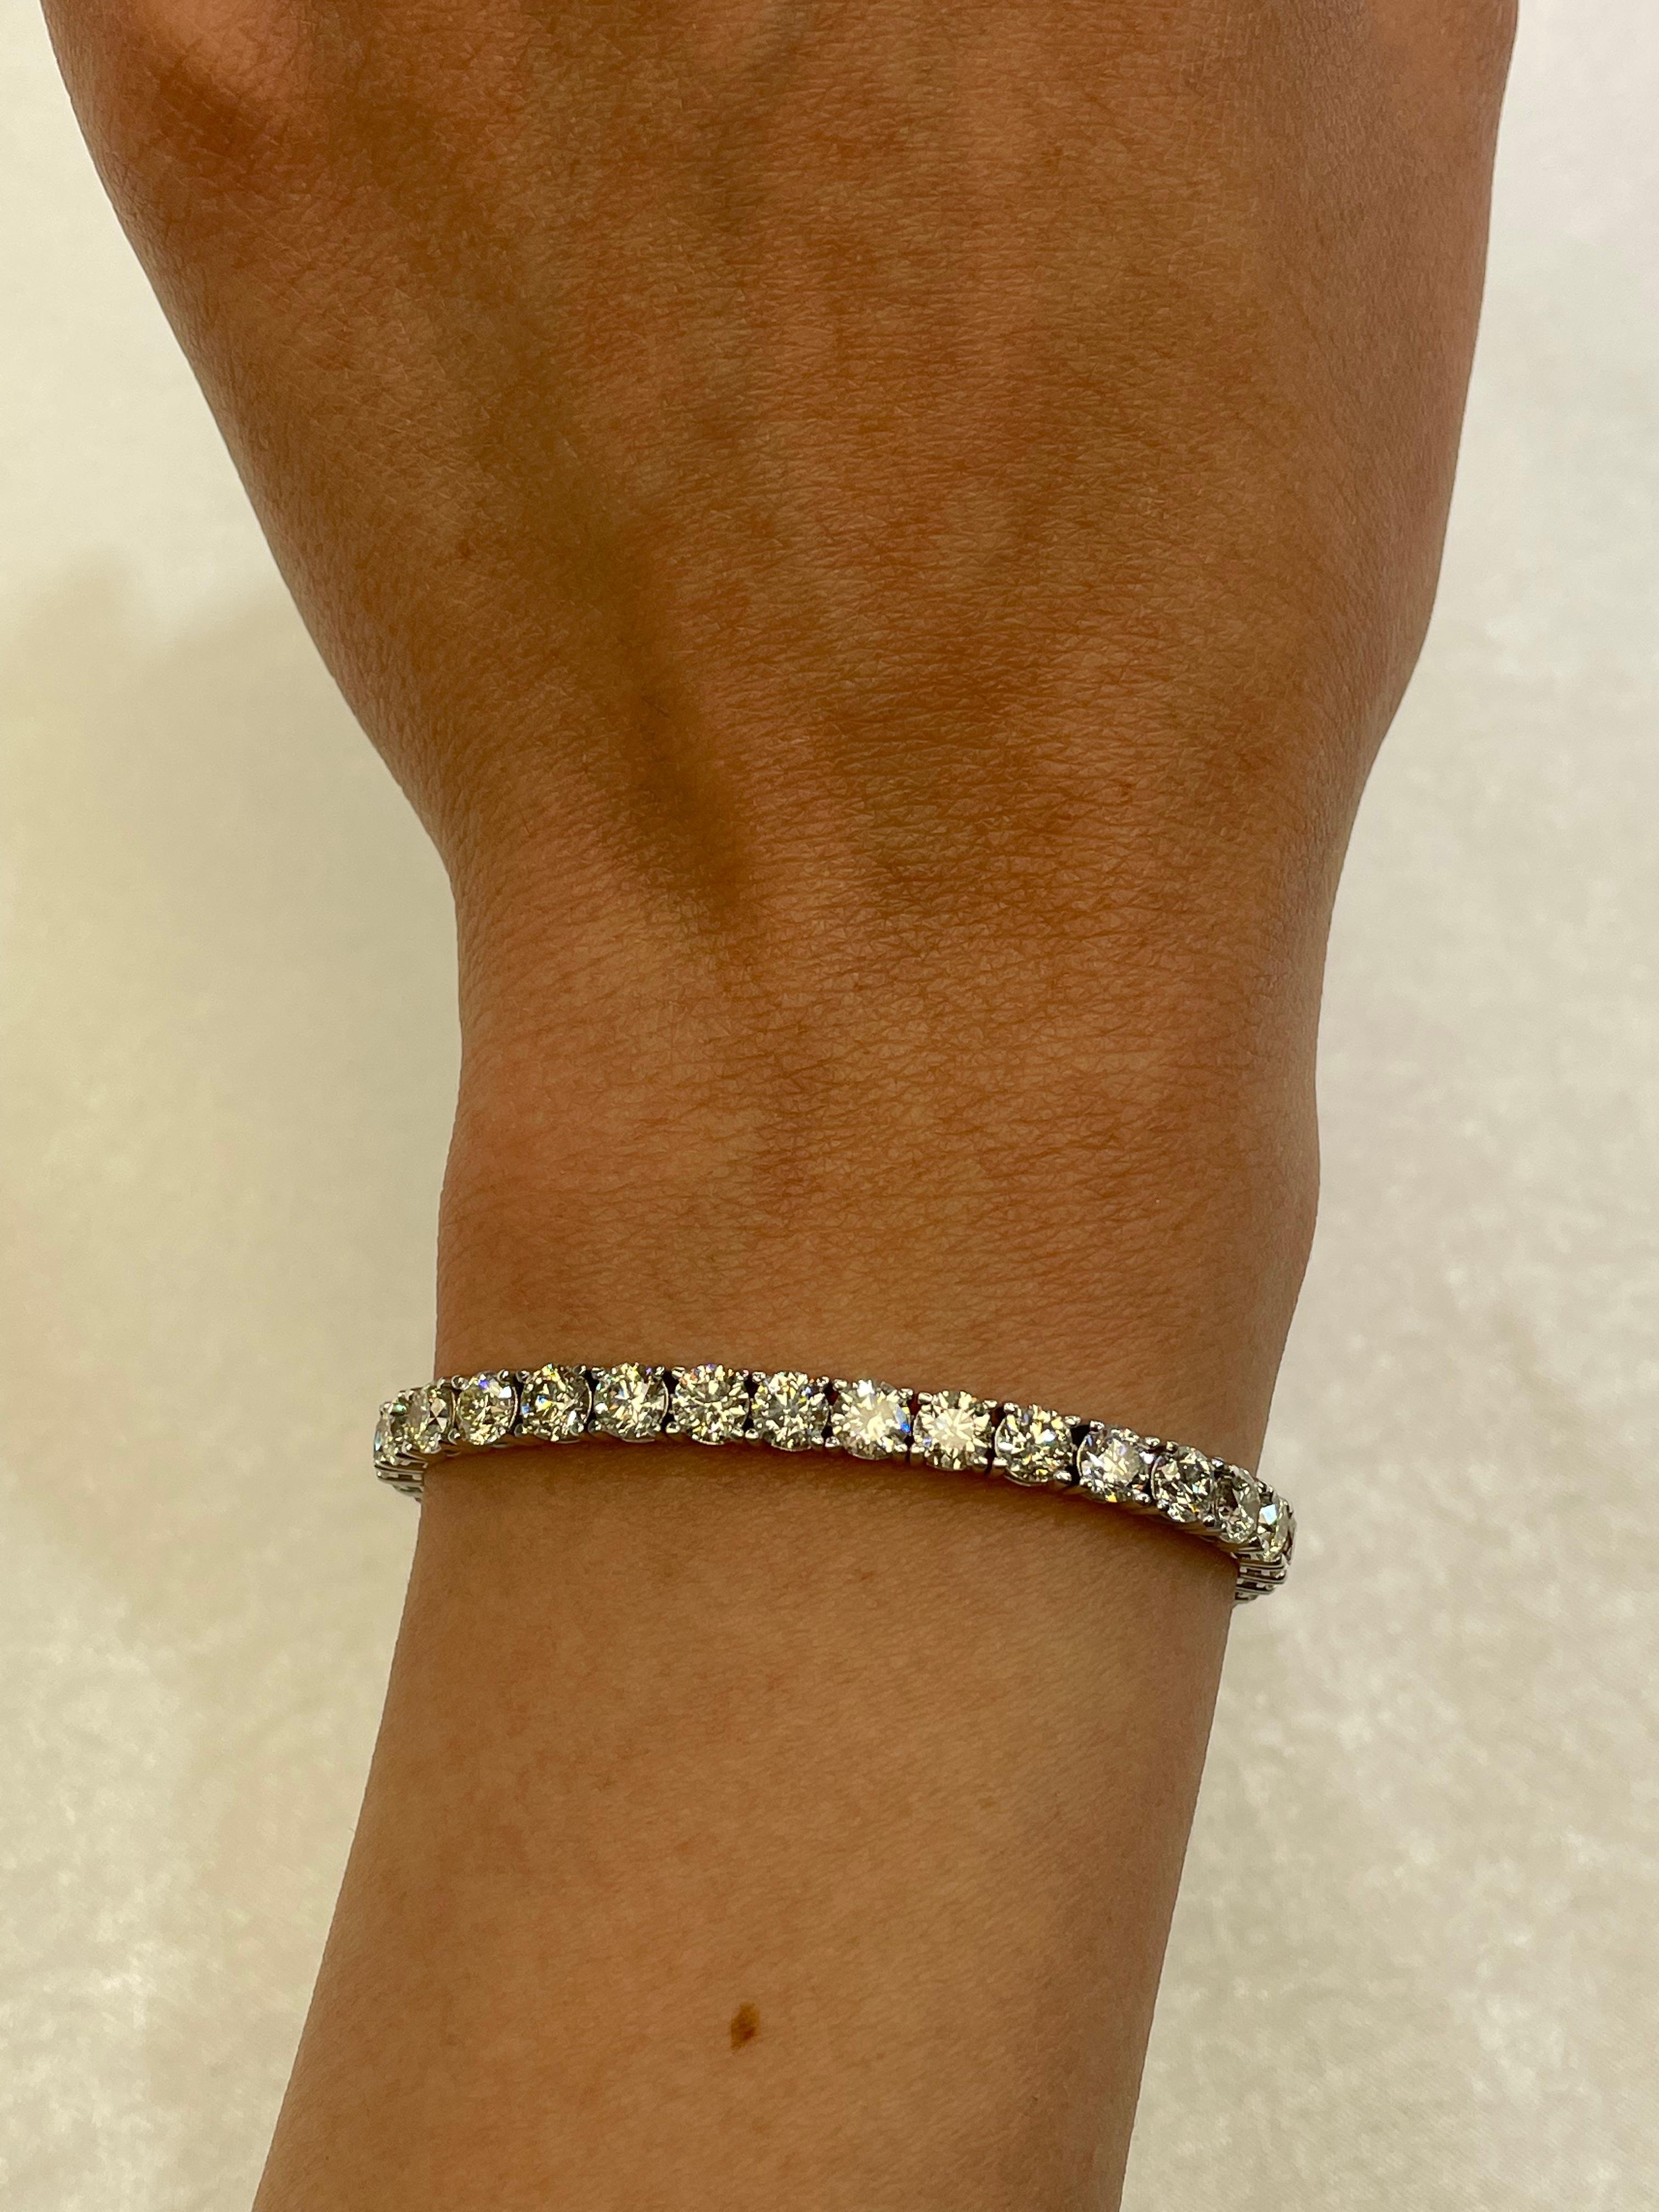 Exquisite and timeless diamonds tennis bracelet, by Alexander Beverly Hills.
40 round brilliant diamonds, 12.11 carats total. Approximately H/I color and VS clarity. Four prong set in 14k white gold, 11.42 grams, 7 inches. 
Accommodated with an up